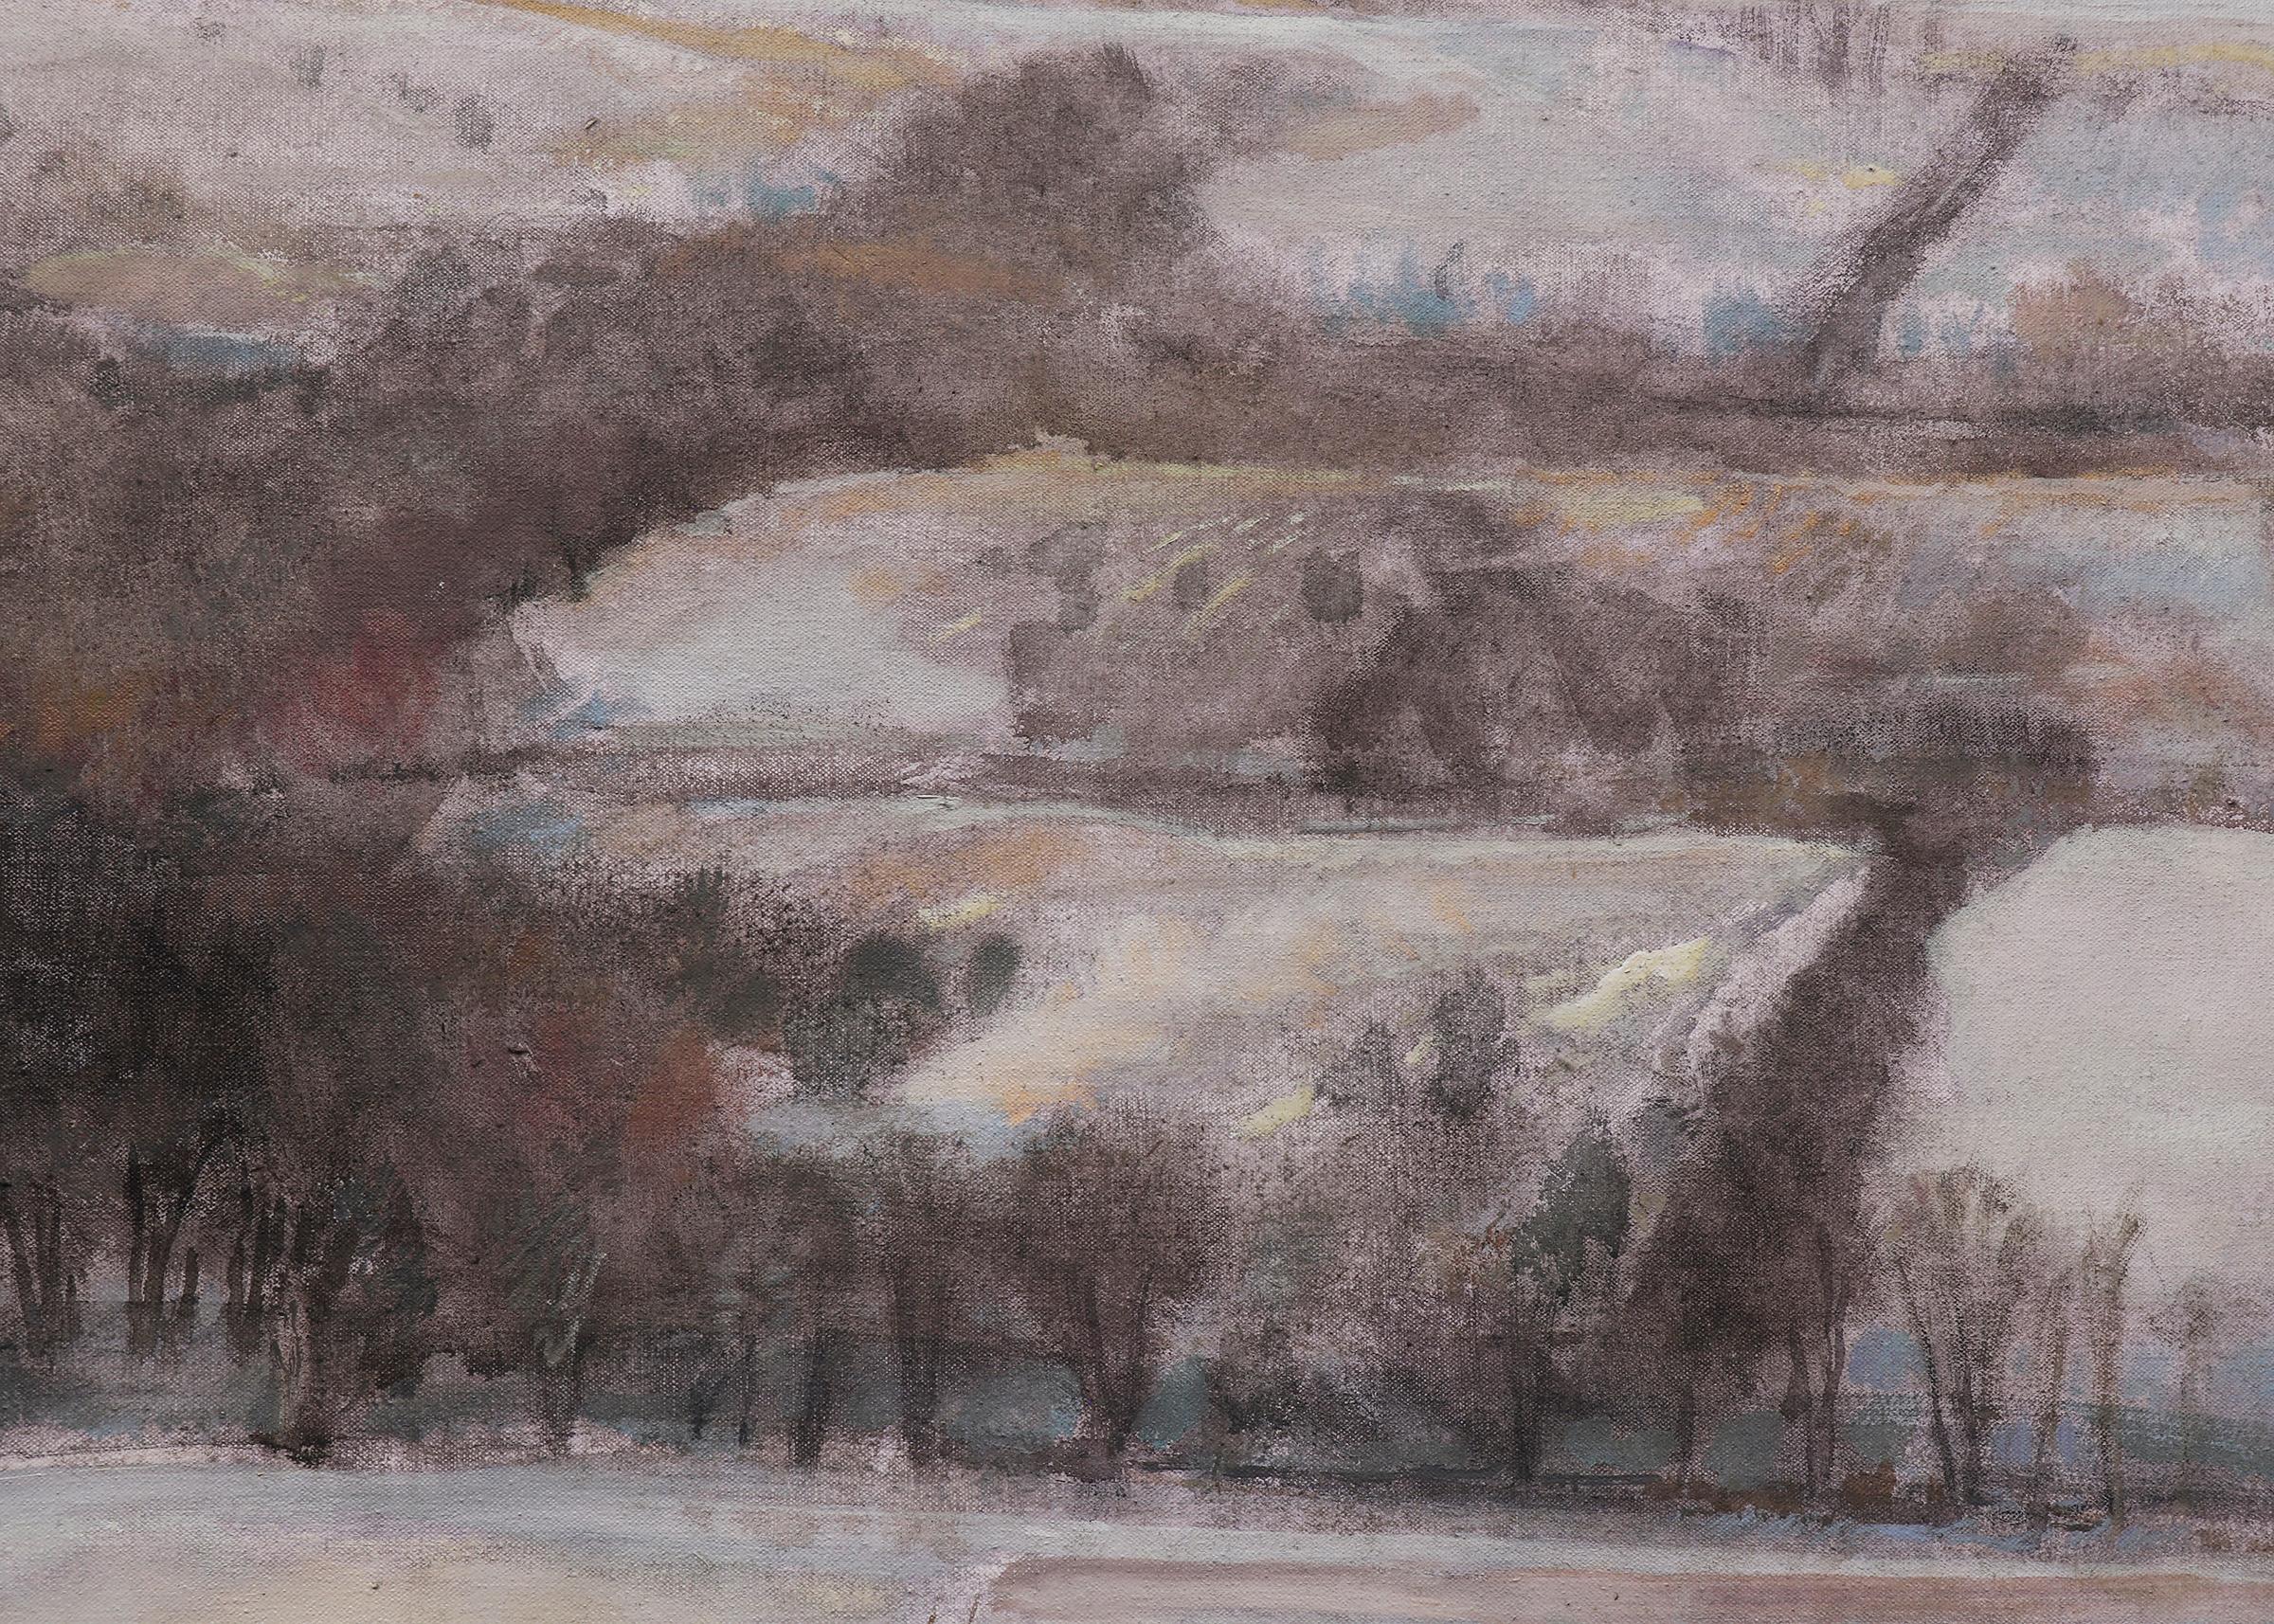 Oil on canvas painting titled 'Snowview of Baldwin (Kansas)' painted in 1989 by Robert N. Sudlow (1920-2010) from 1989. Snowy landscape scene painted in shades of gray, brown, white, and rich blues. Presented in a vintage frame measuring 42 1⁄2 x 52